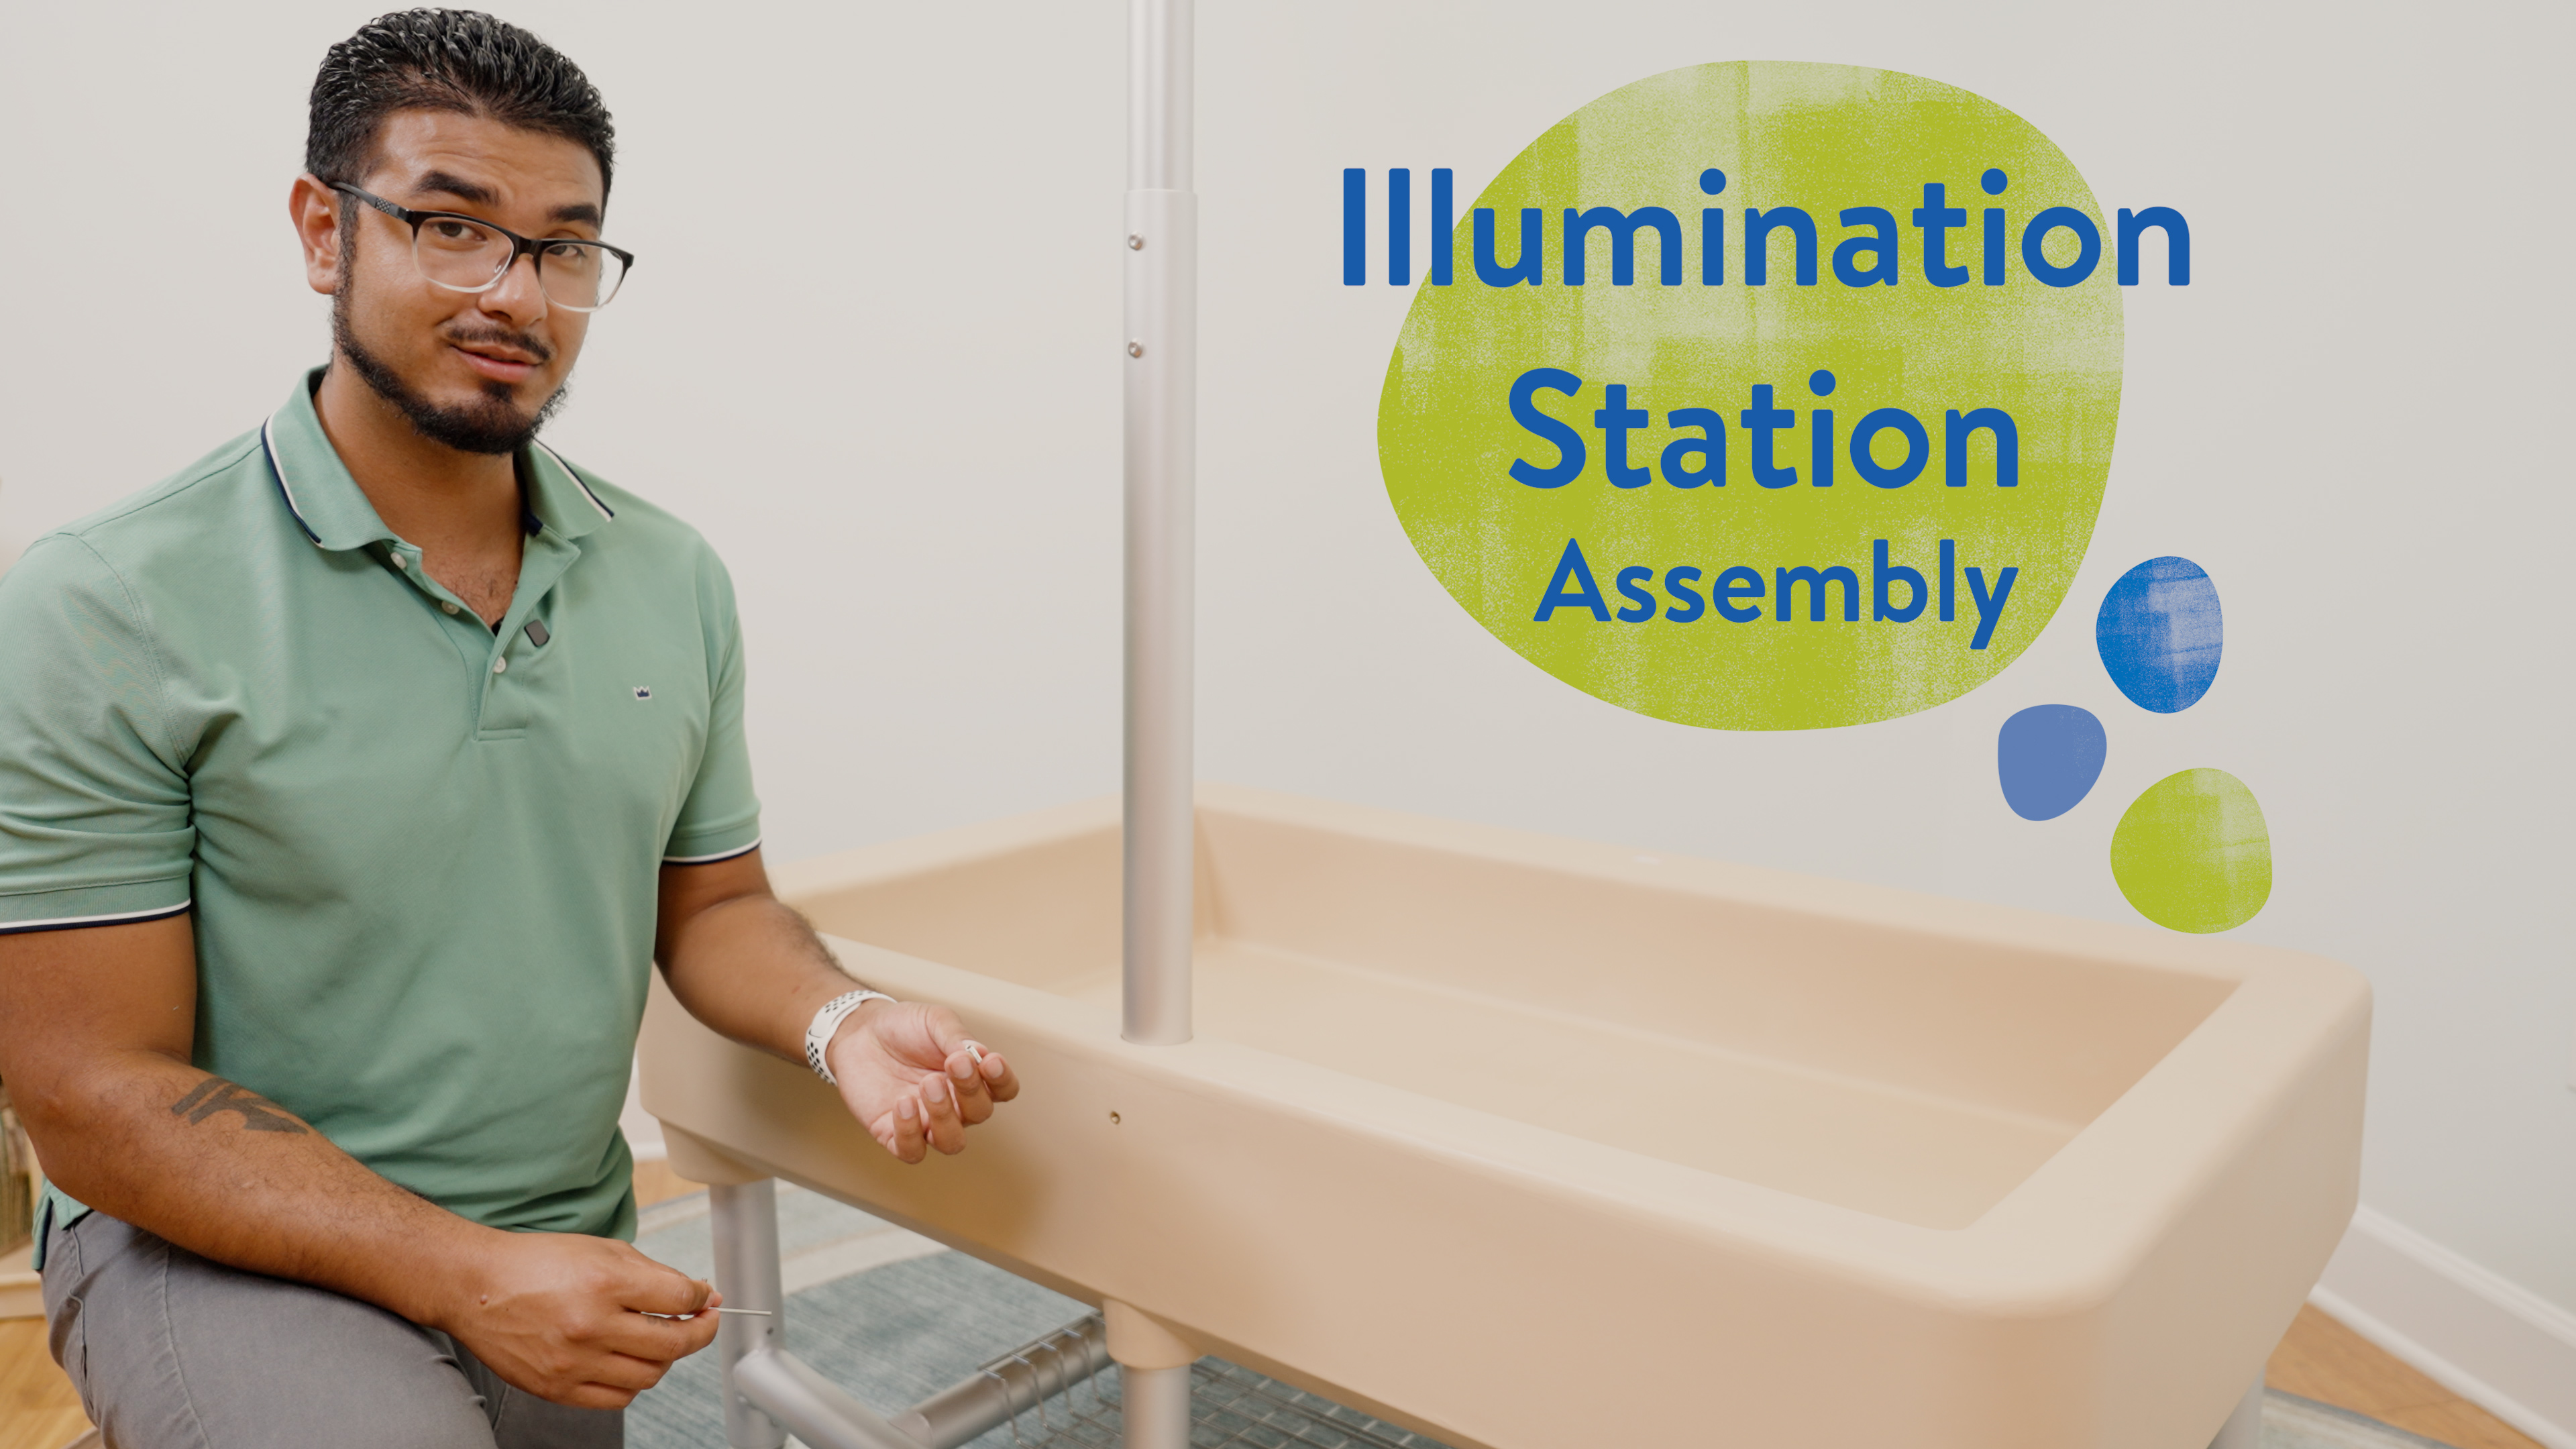 Video: How to Assemble the Illumination Station